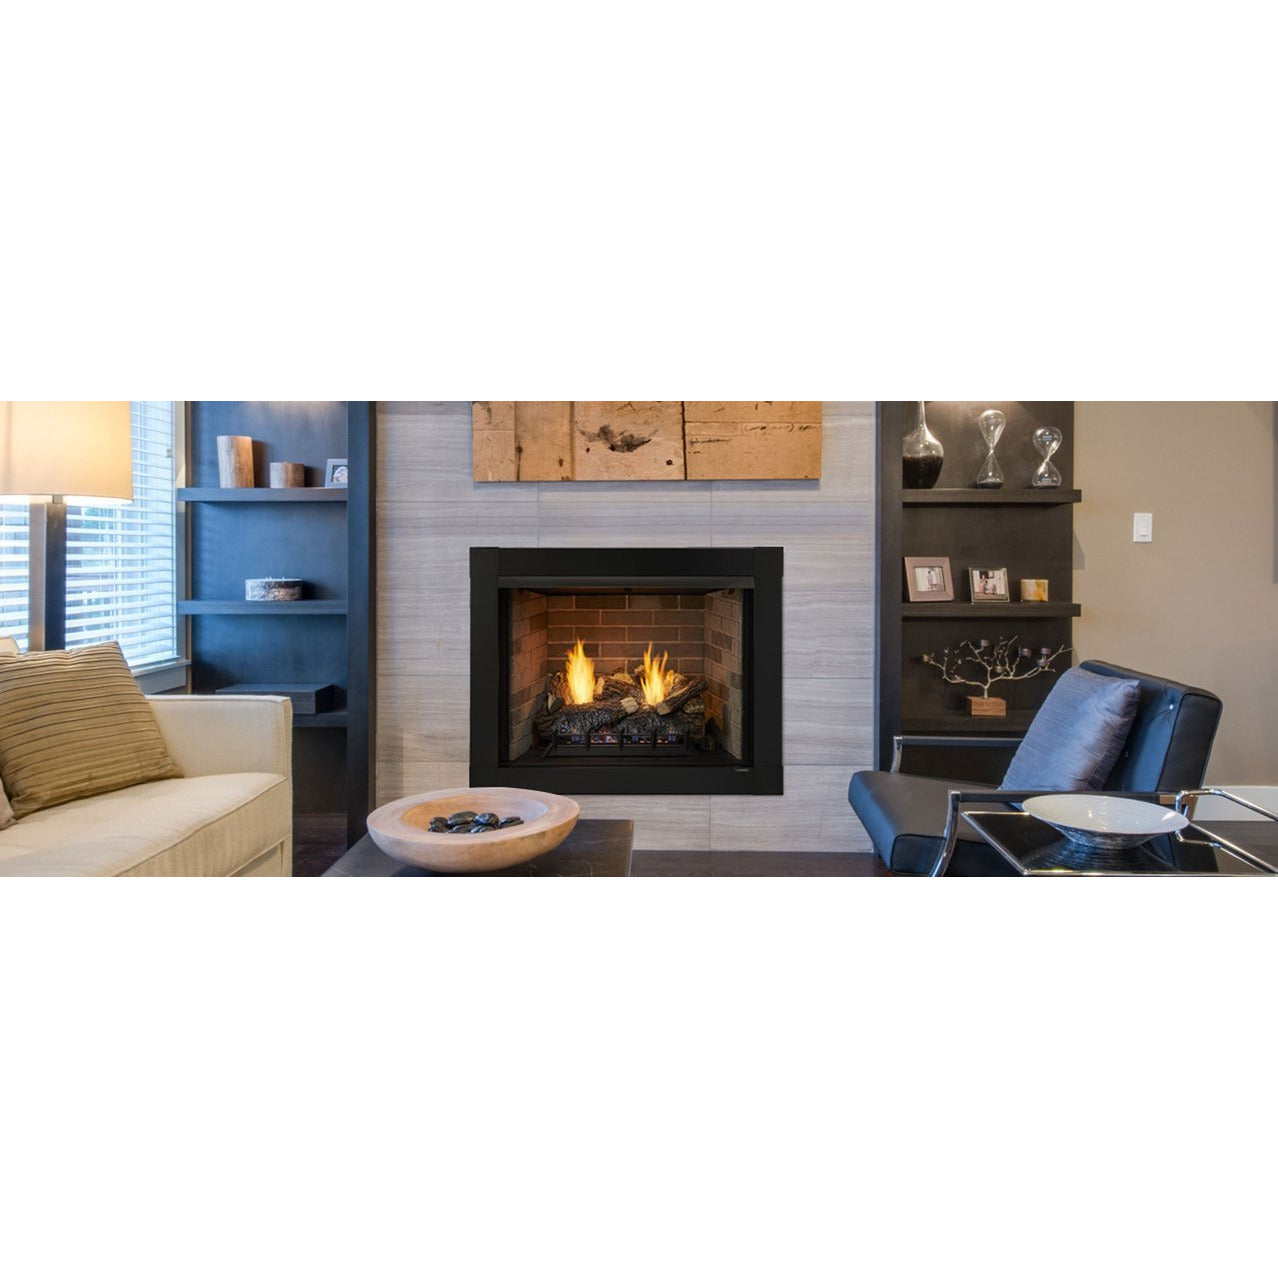 Monessen 42" Attribute Vent-Free Firebox ACUF42 - Everything Fireplaces